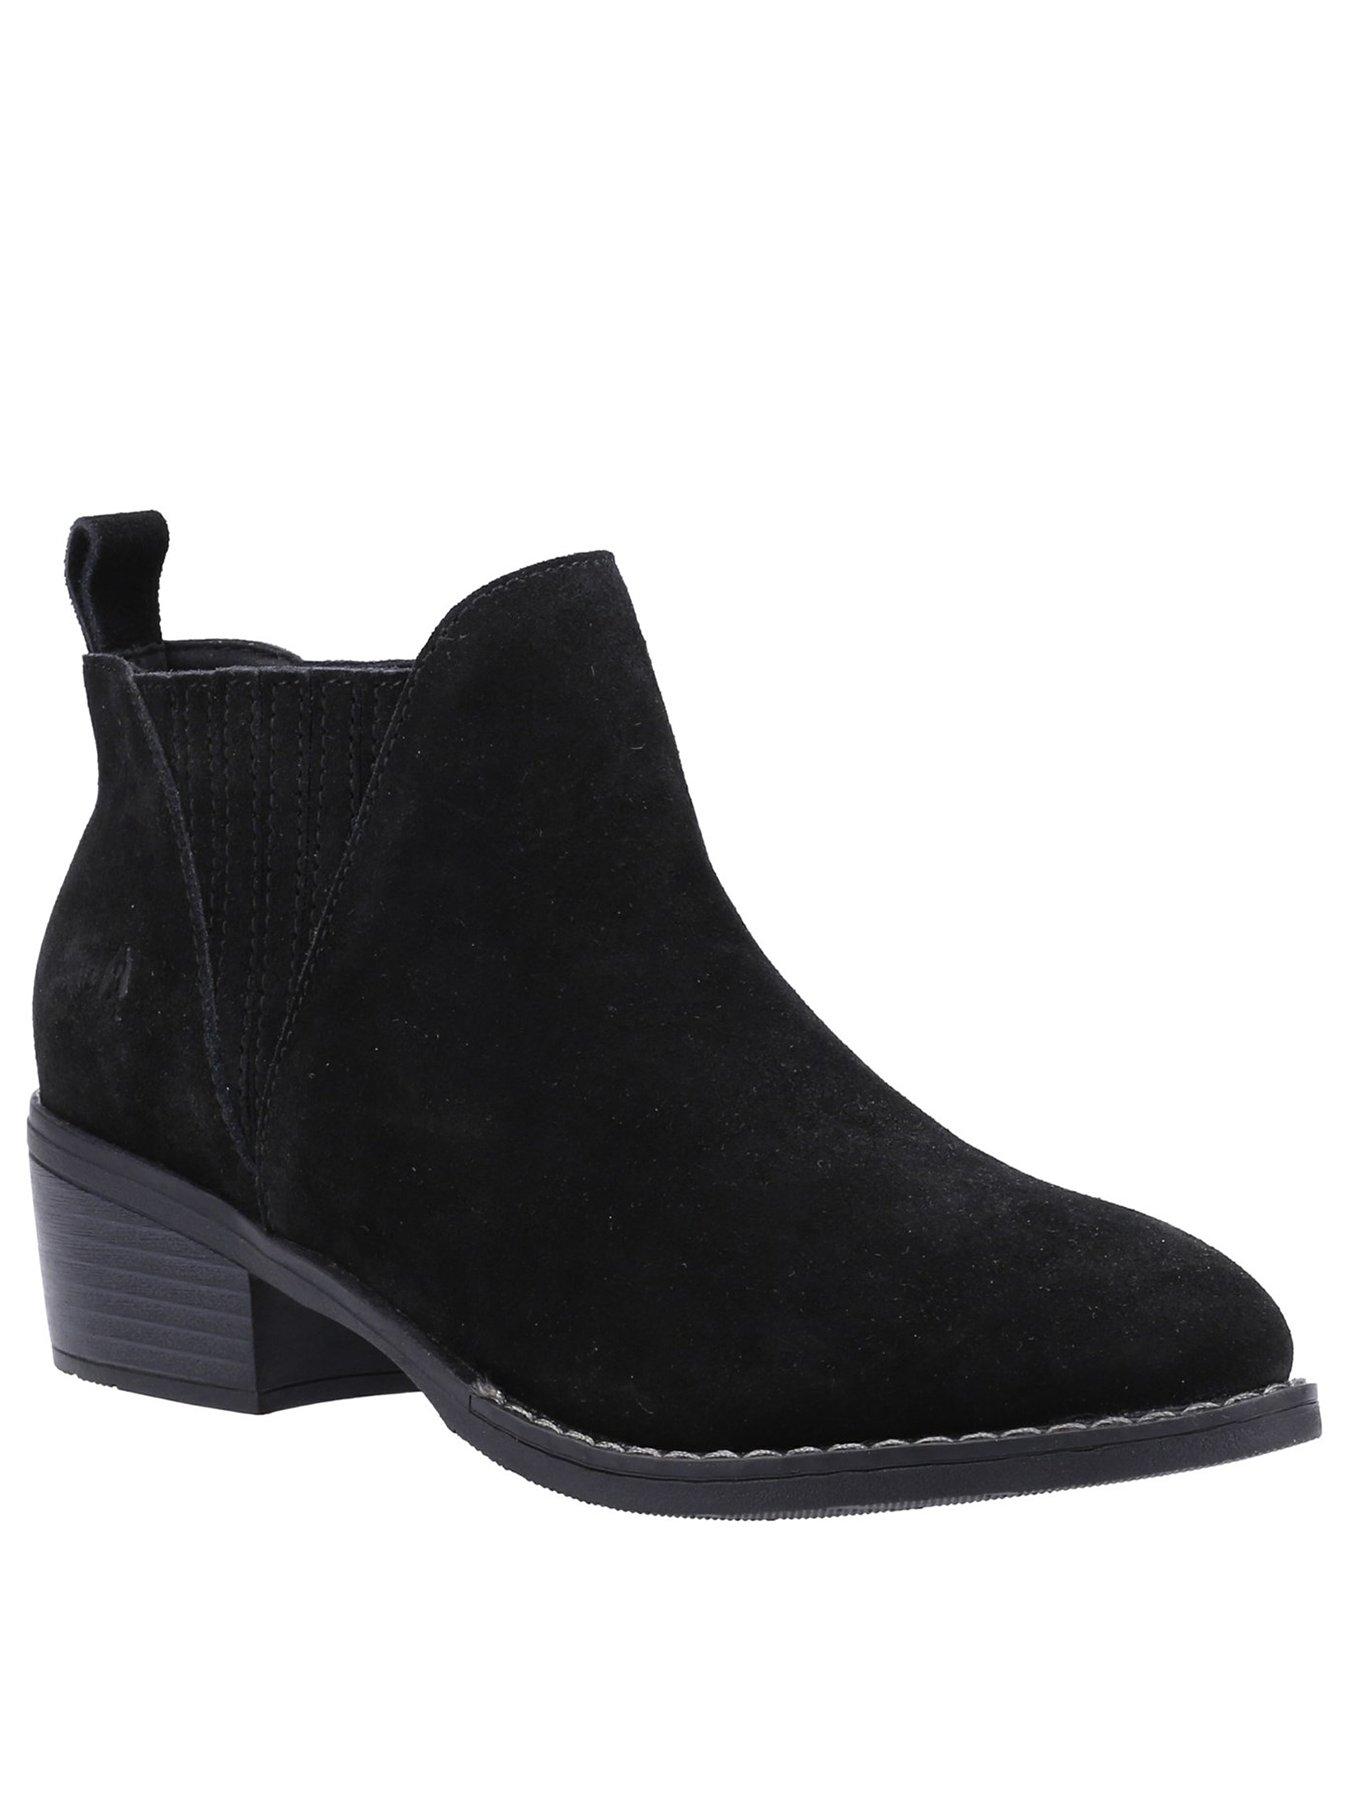 Hush Puppies Emilia Ruched Ankle Boot - Black